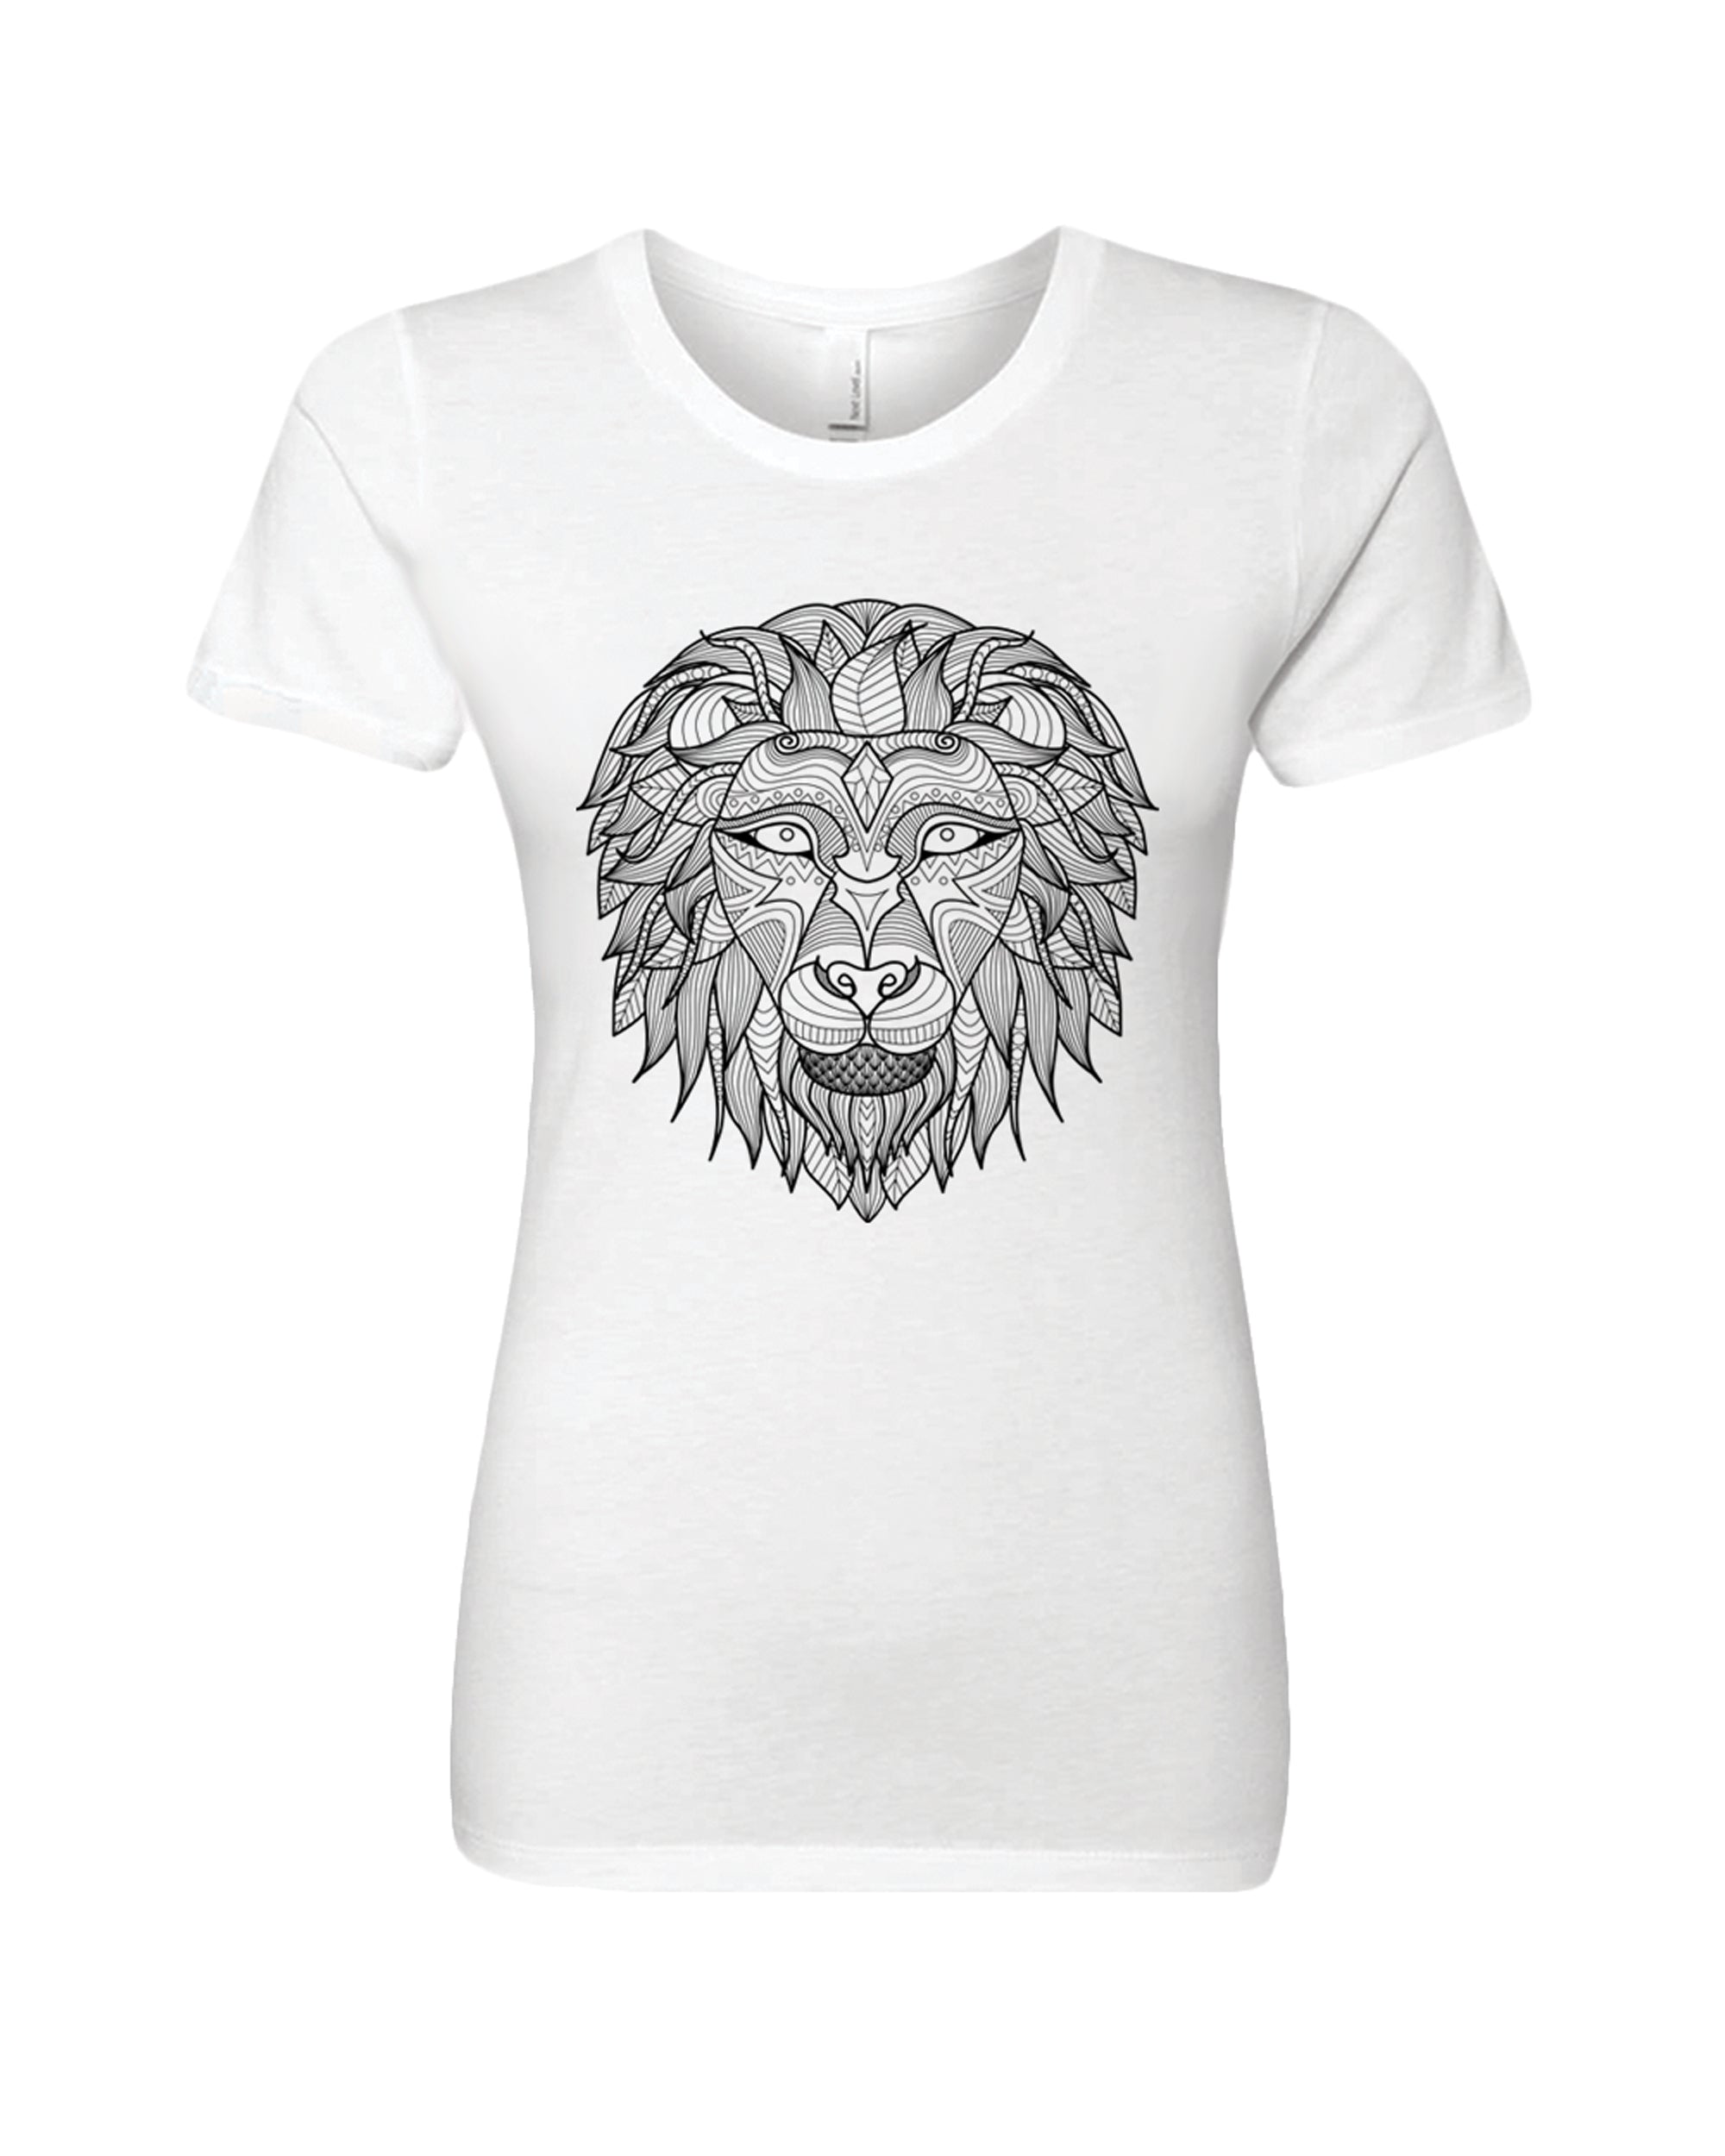 Women's Coloring Lion White T Shirt - Adorned By You